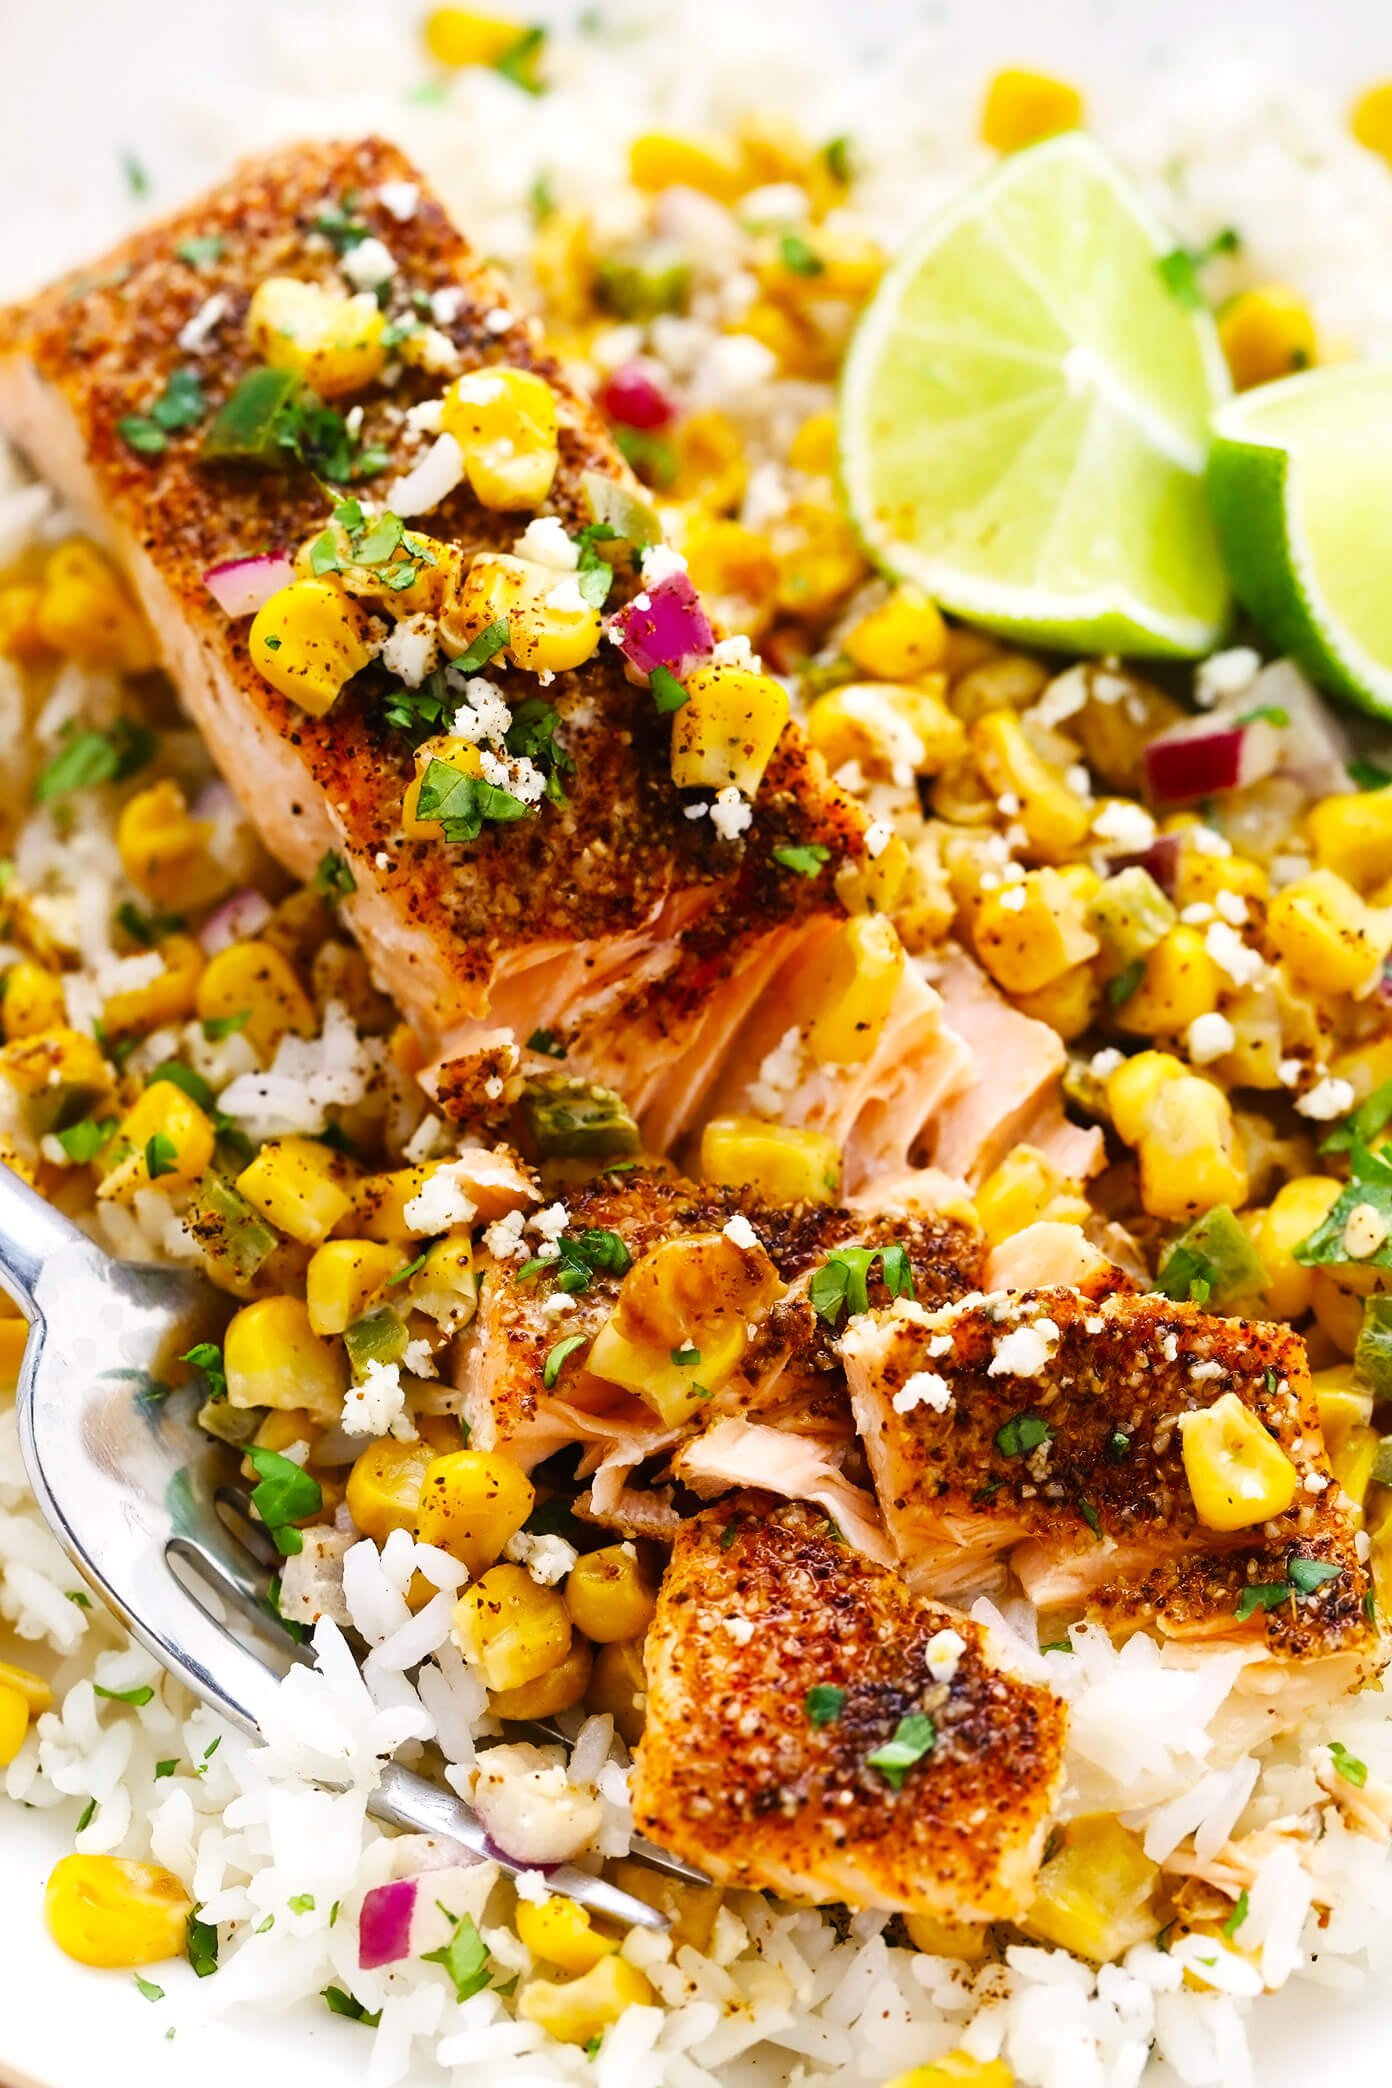 Chili Lime Salmon with Esquites Closeup